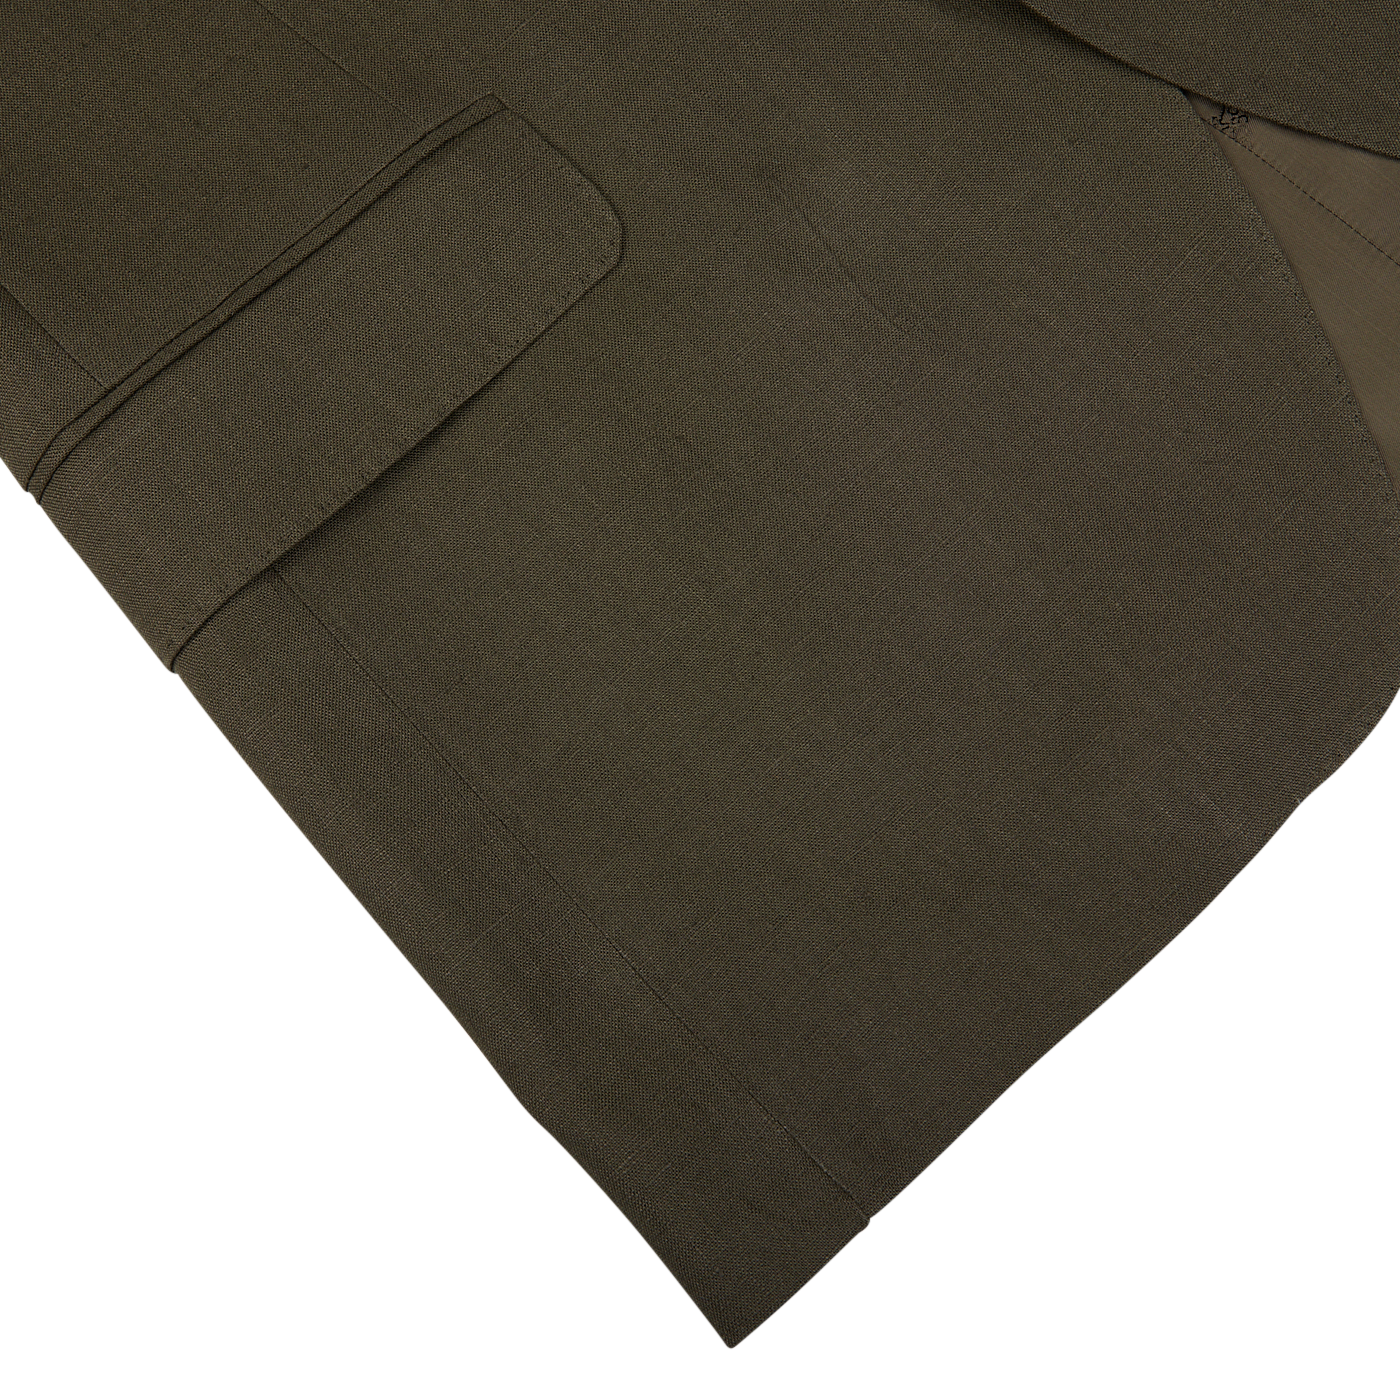 Close-up view of a Green Leaf Pure Linen Suit jacket by Oscar Jacobson with a focus on the fabric texture and pocket detail.